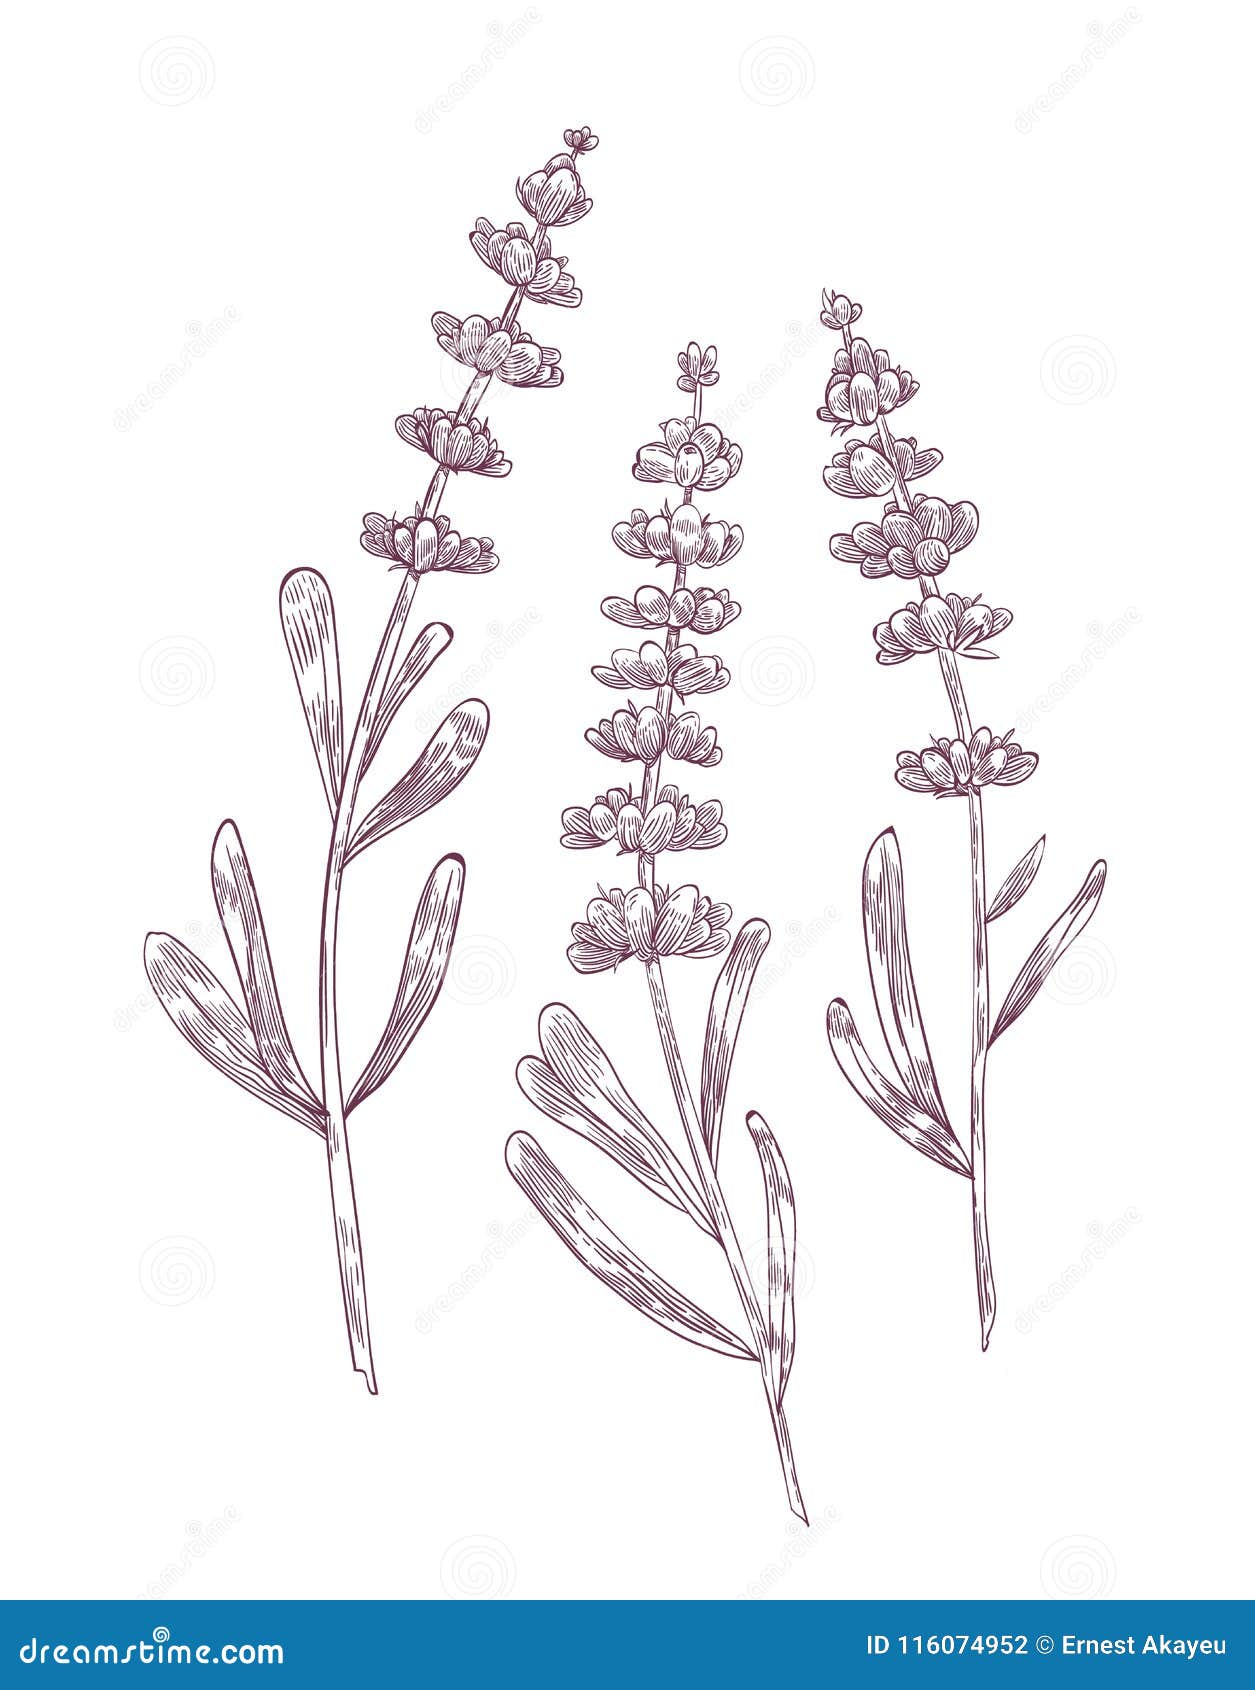 6521 Lavender Field Drawing Images Stock Photos  Vectors  Shutterstock